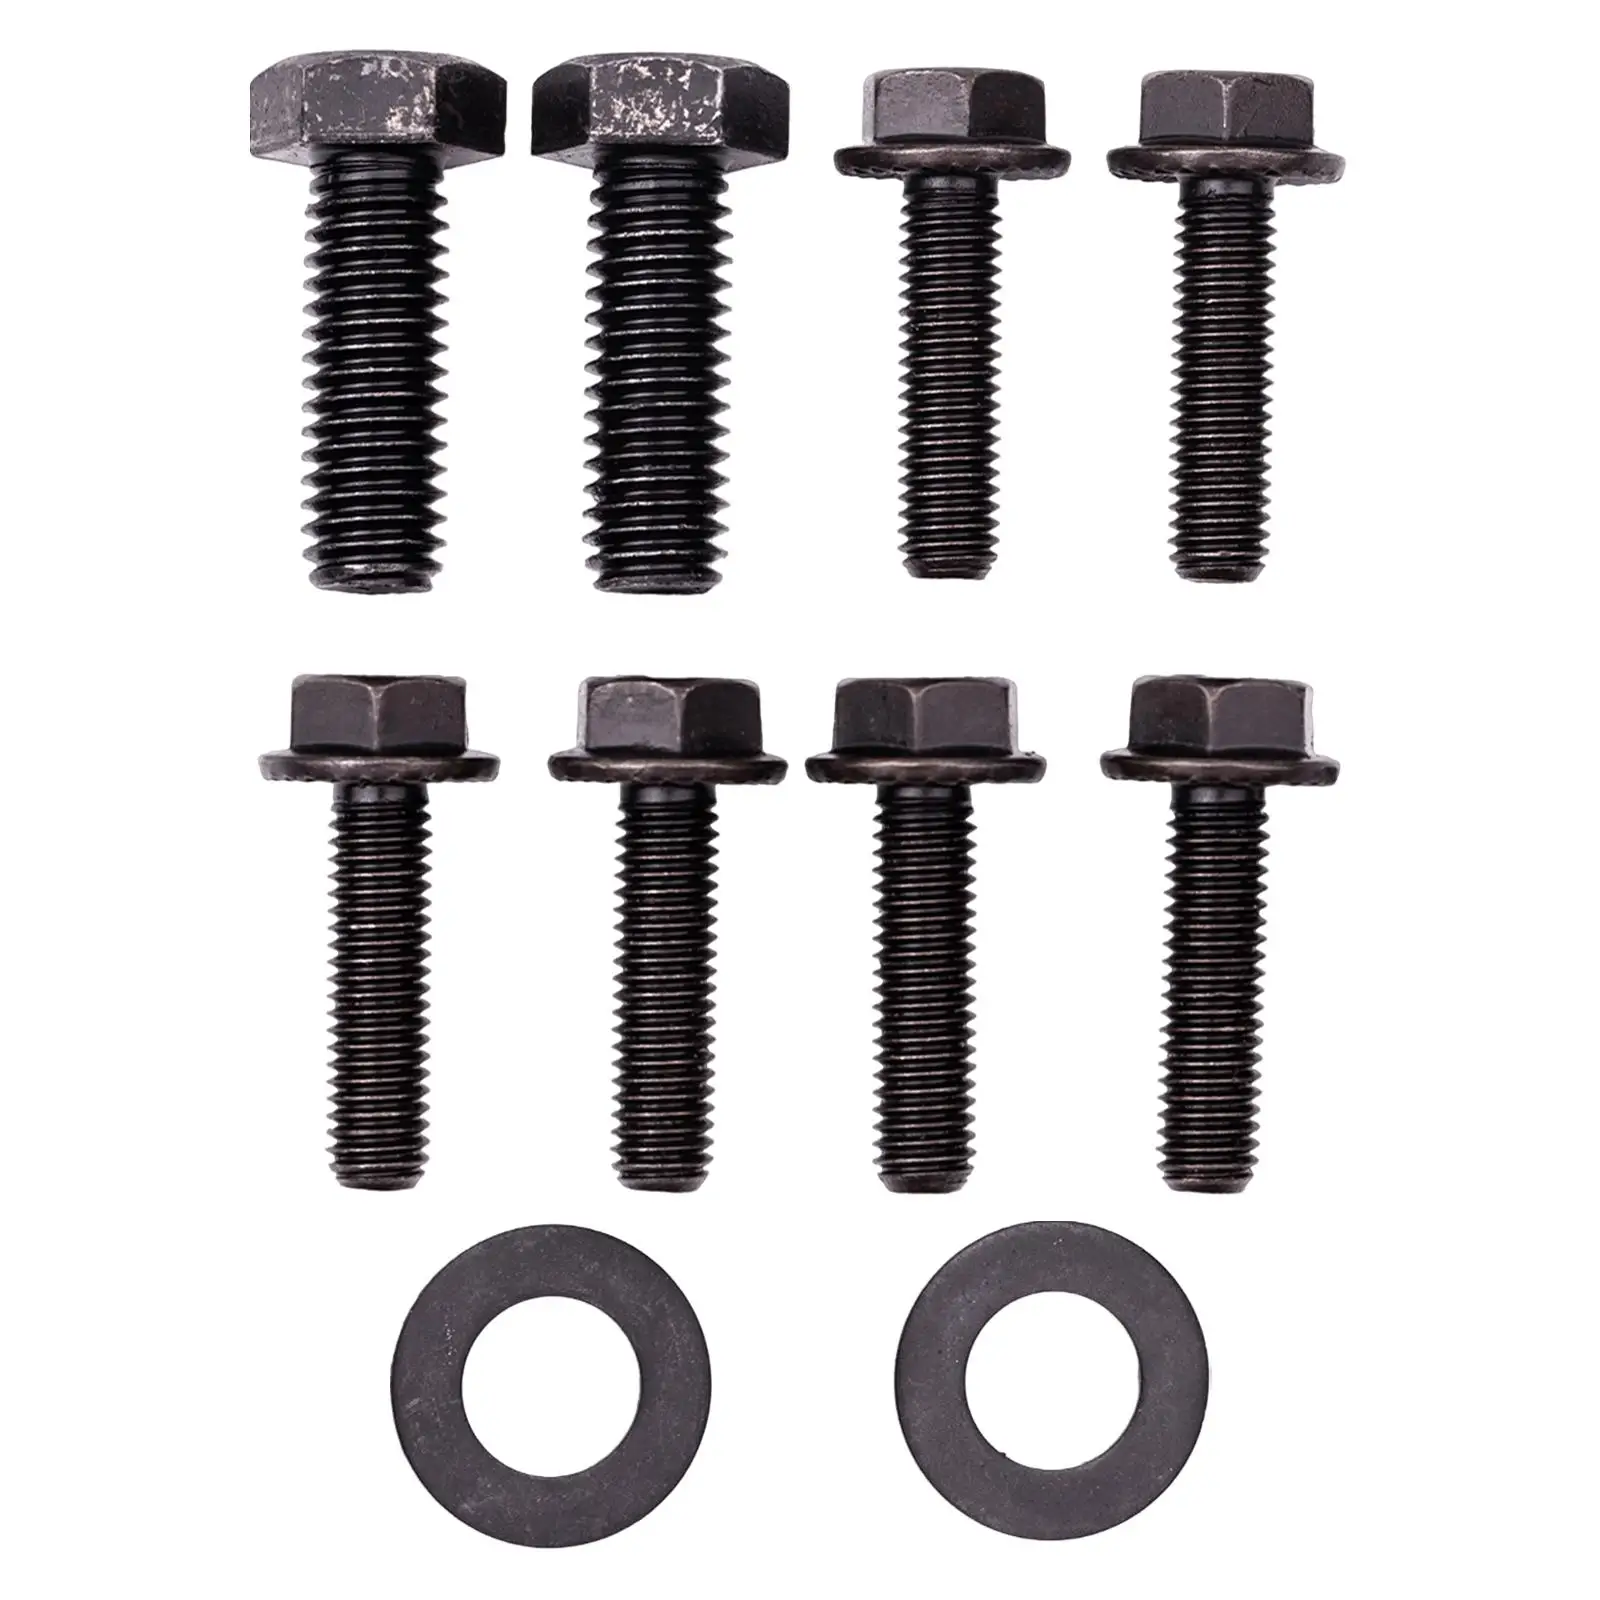 Front Seat Mounting Bolts Heavy Duty Supplies Replacement Durable Easily Install Automobile for Jeep Wrangler TJ 1997-2006